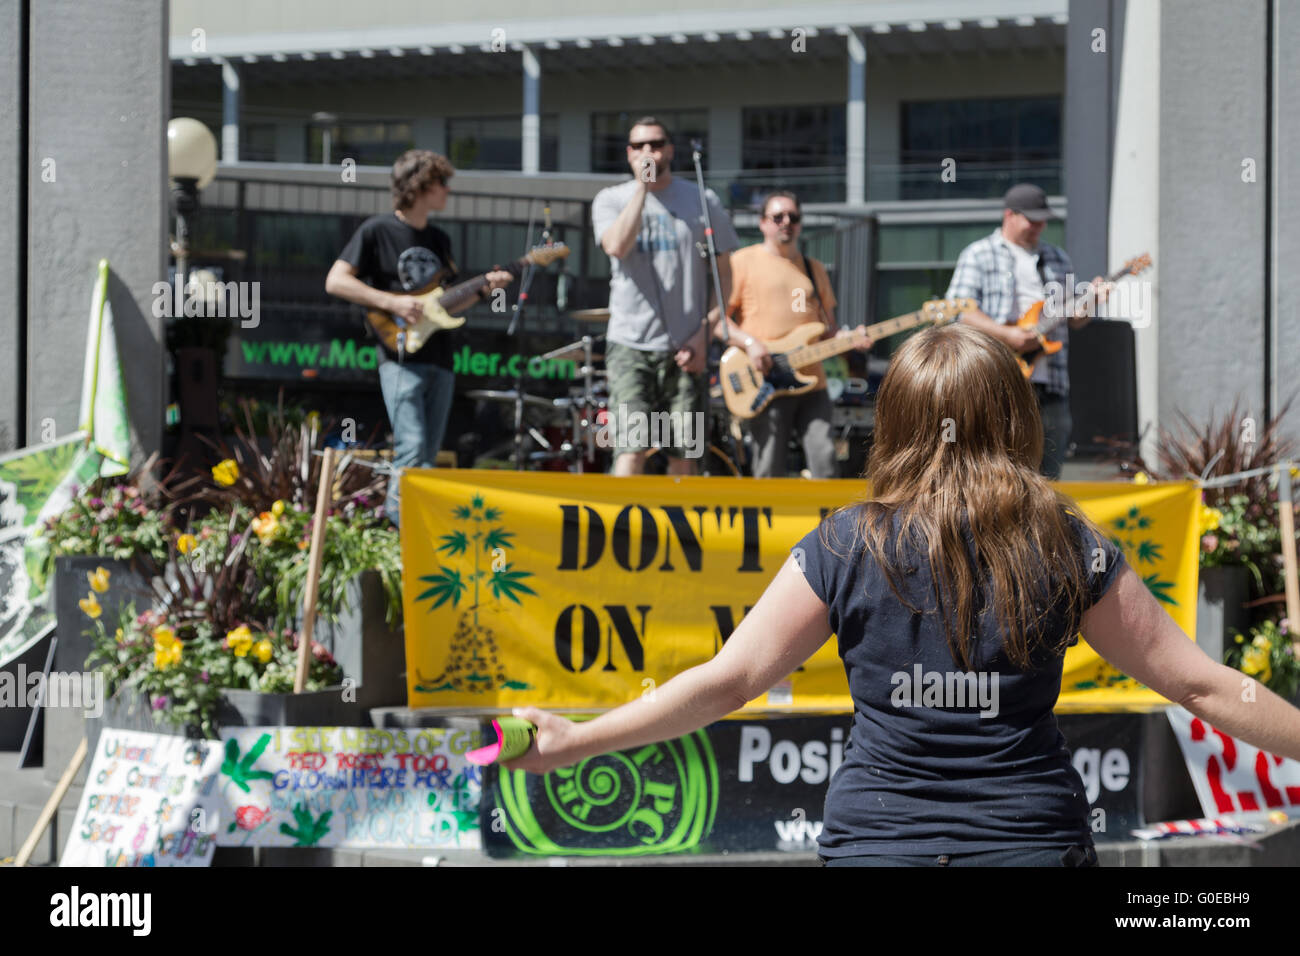 Seattle, WA, USA. 30th April, 2016. I-1419 rally. Current law requires medical marijuana users to be registered by state. Stock Photo